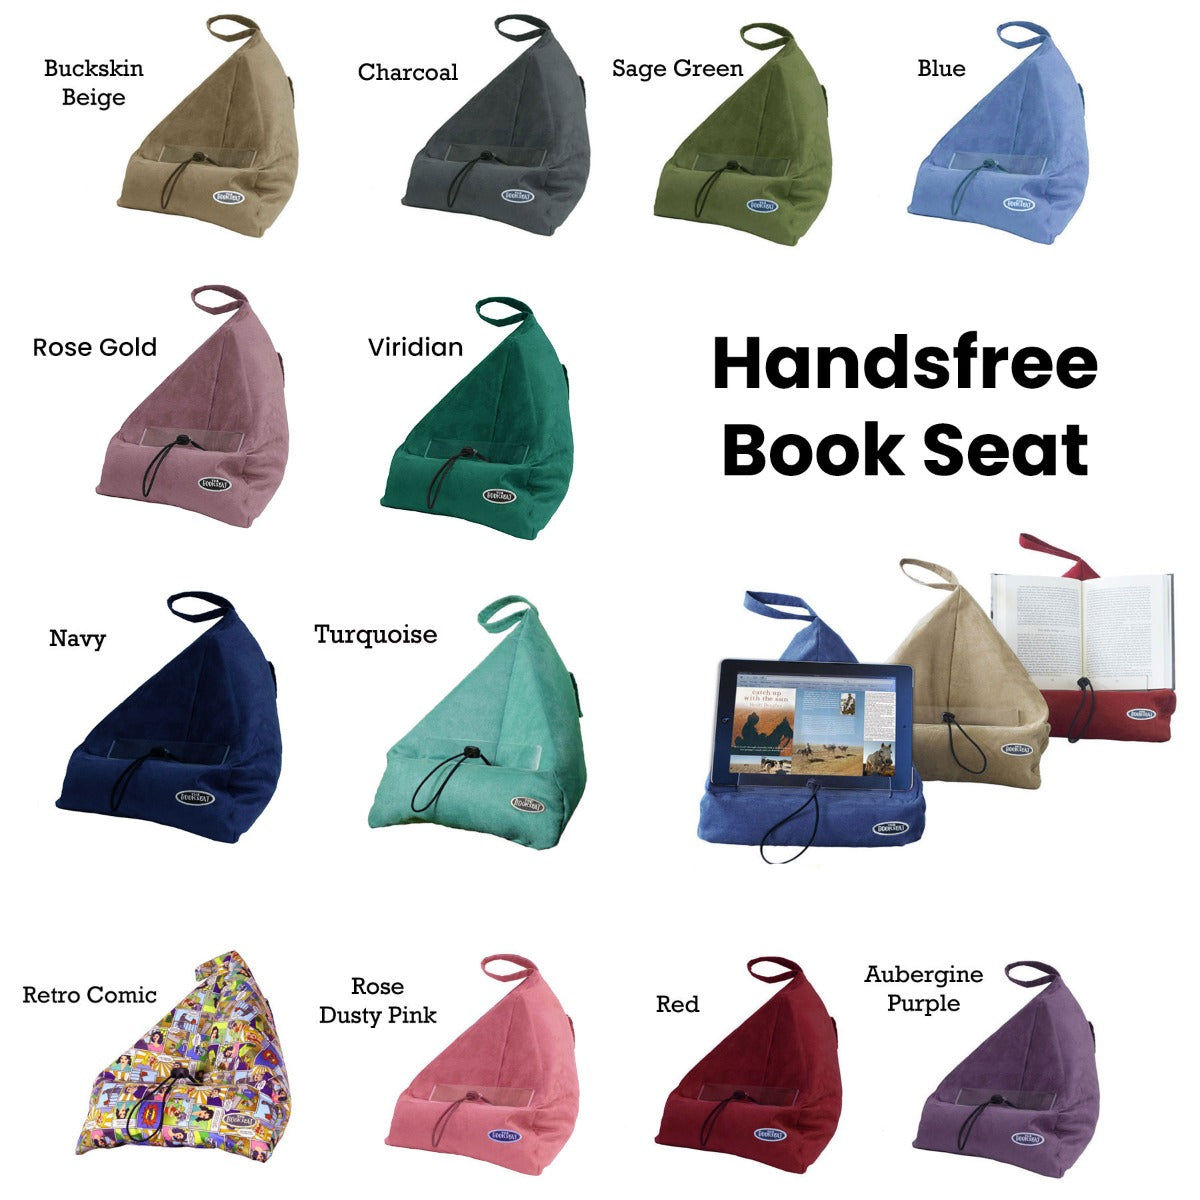 The Book Seat Handsfree Book Seat Navy